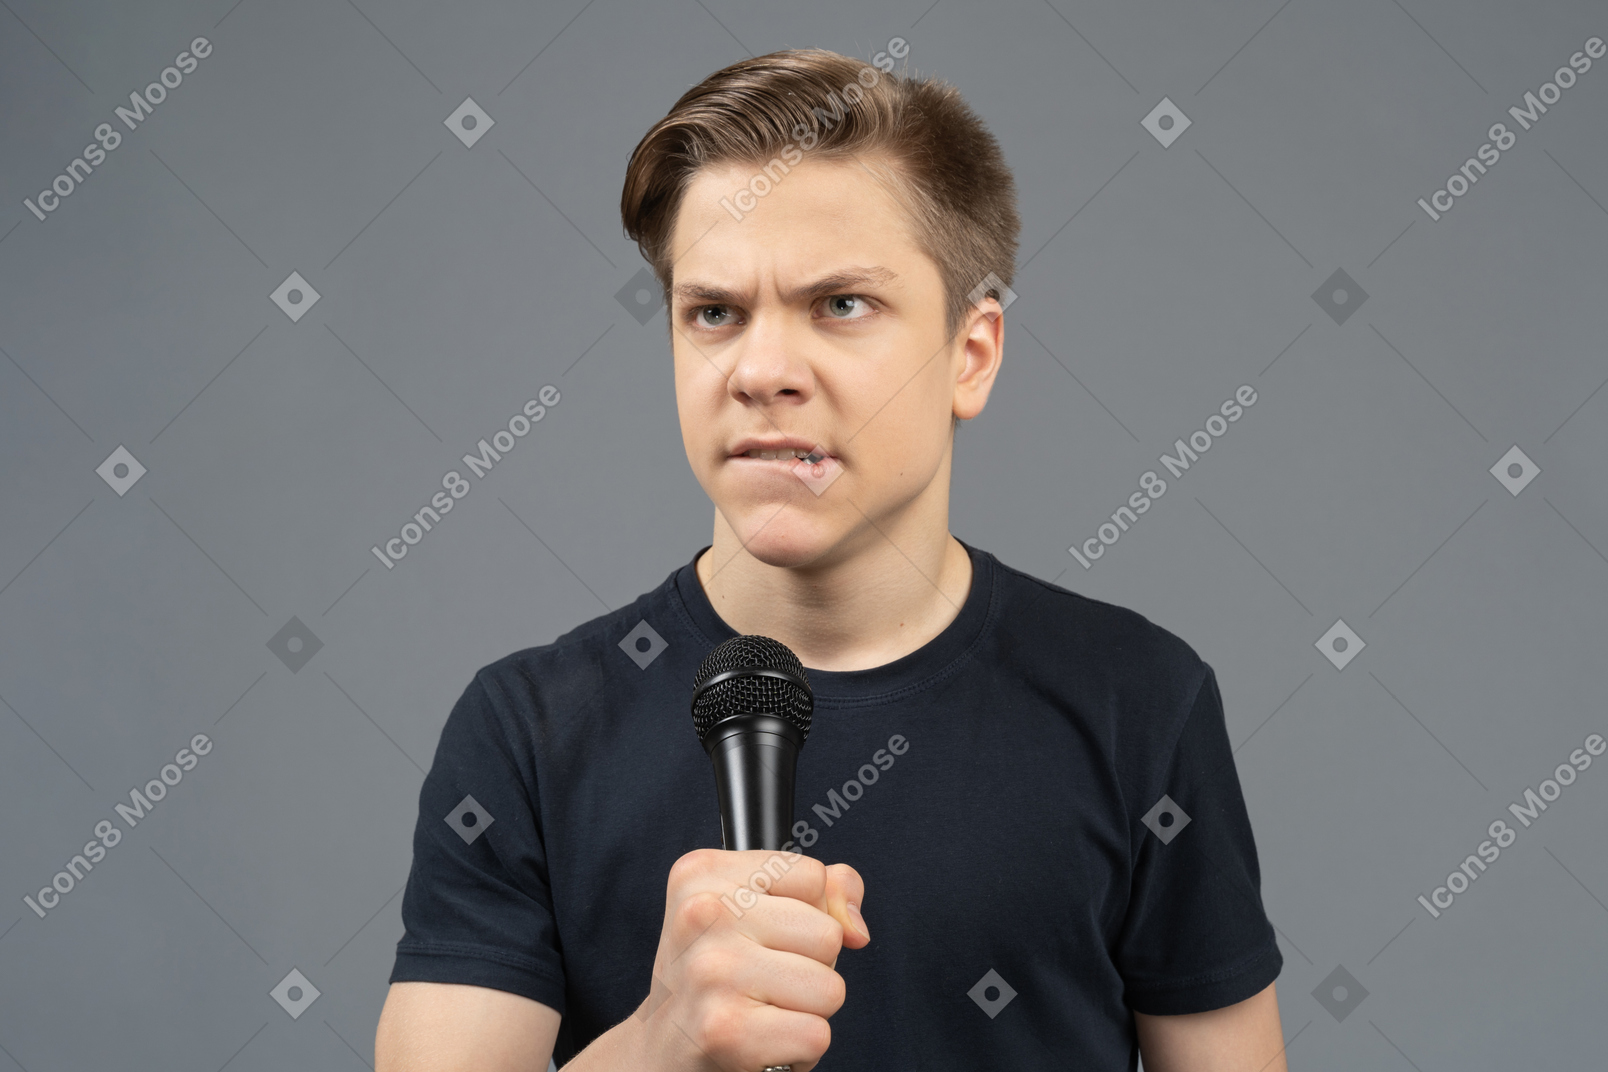 Angry young man holding microphone